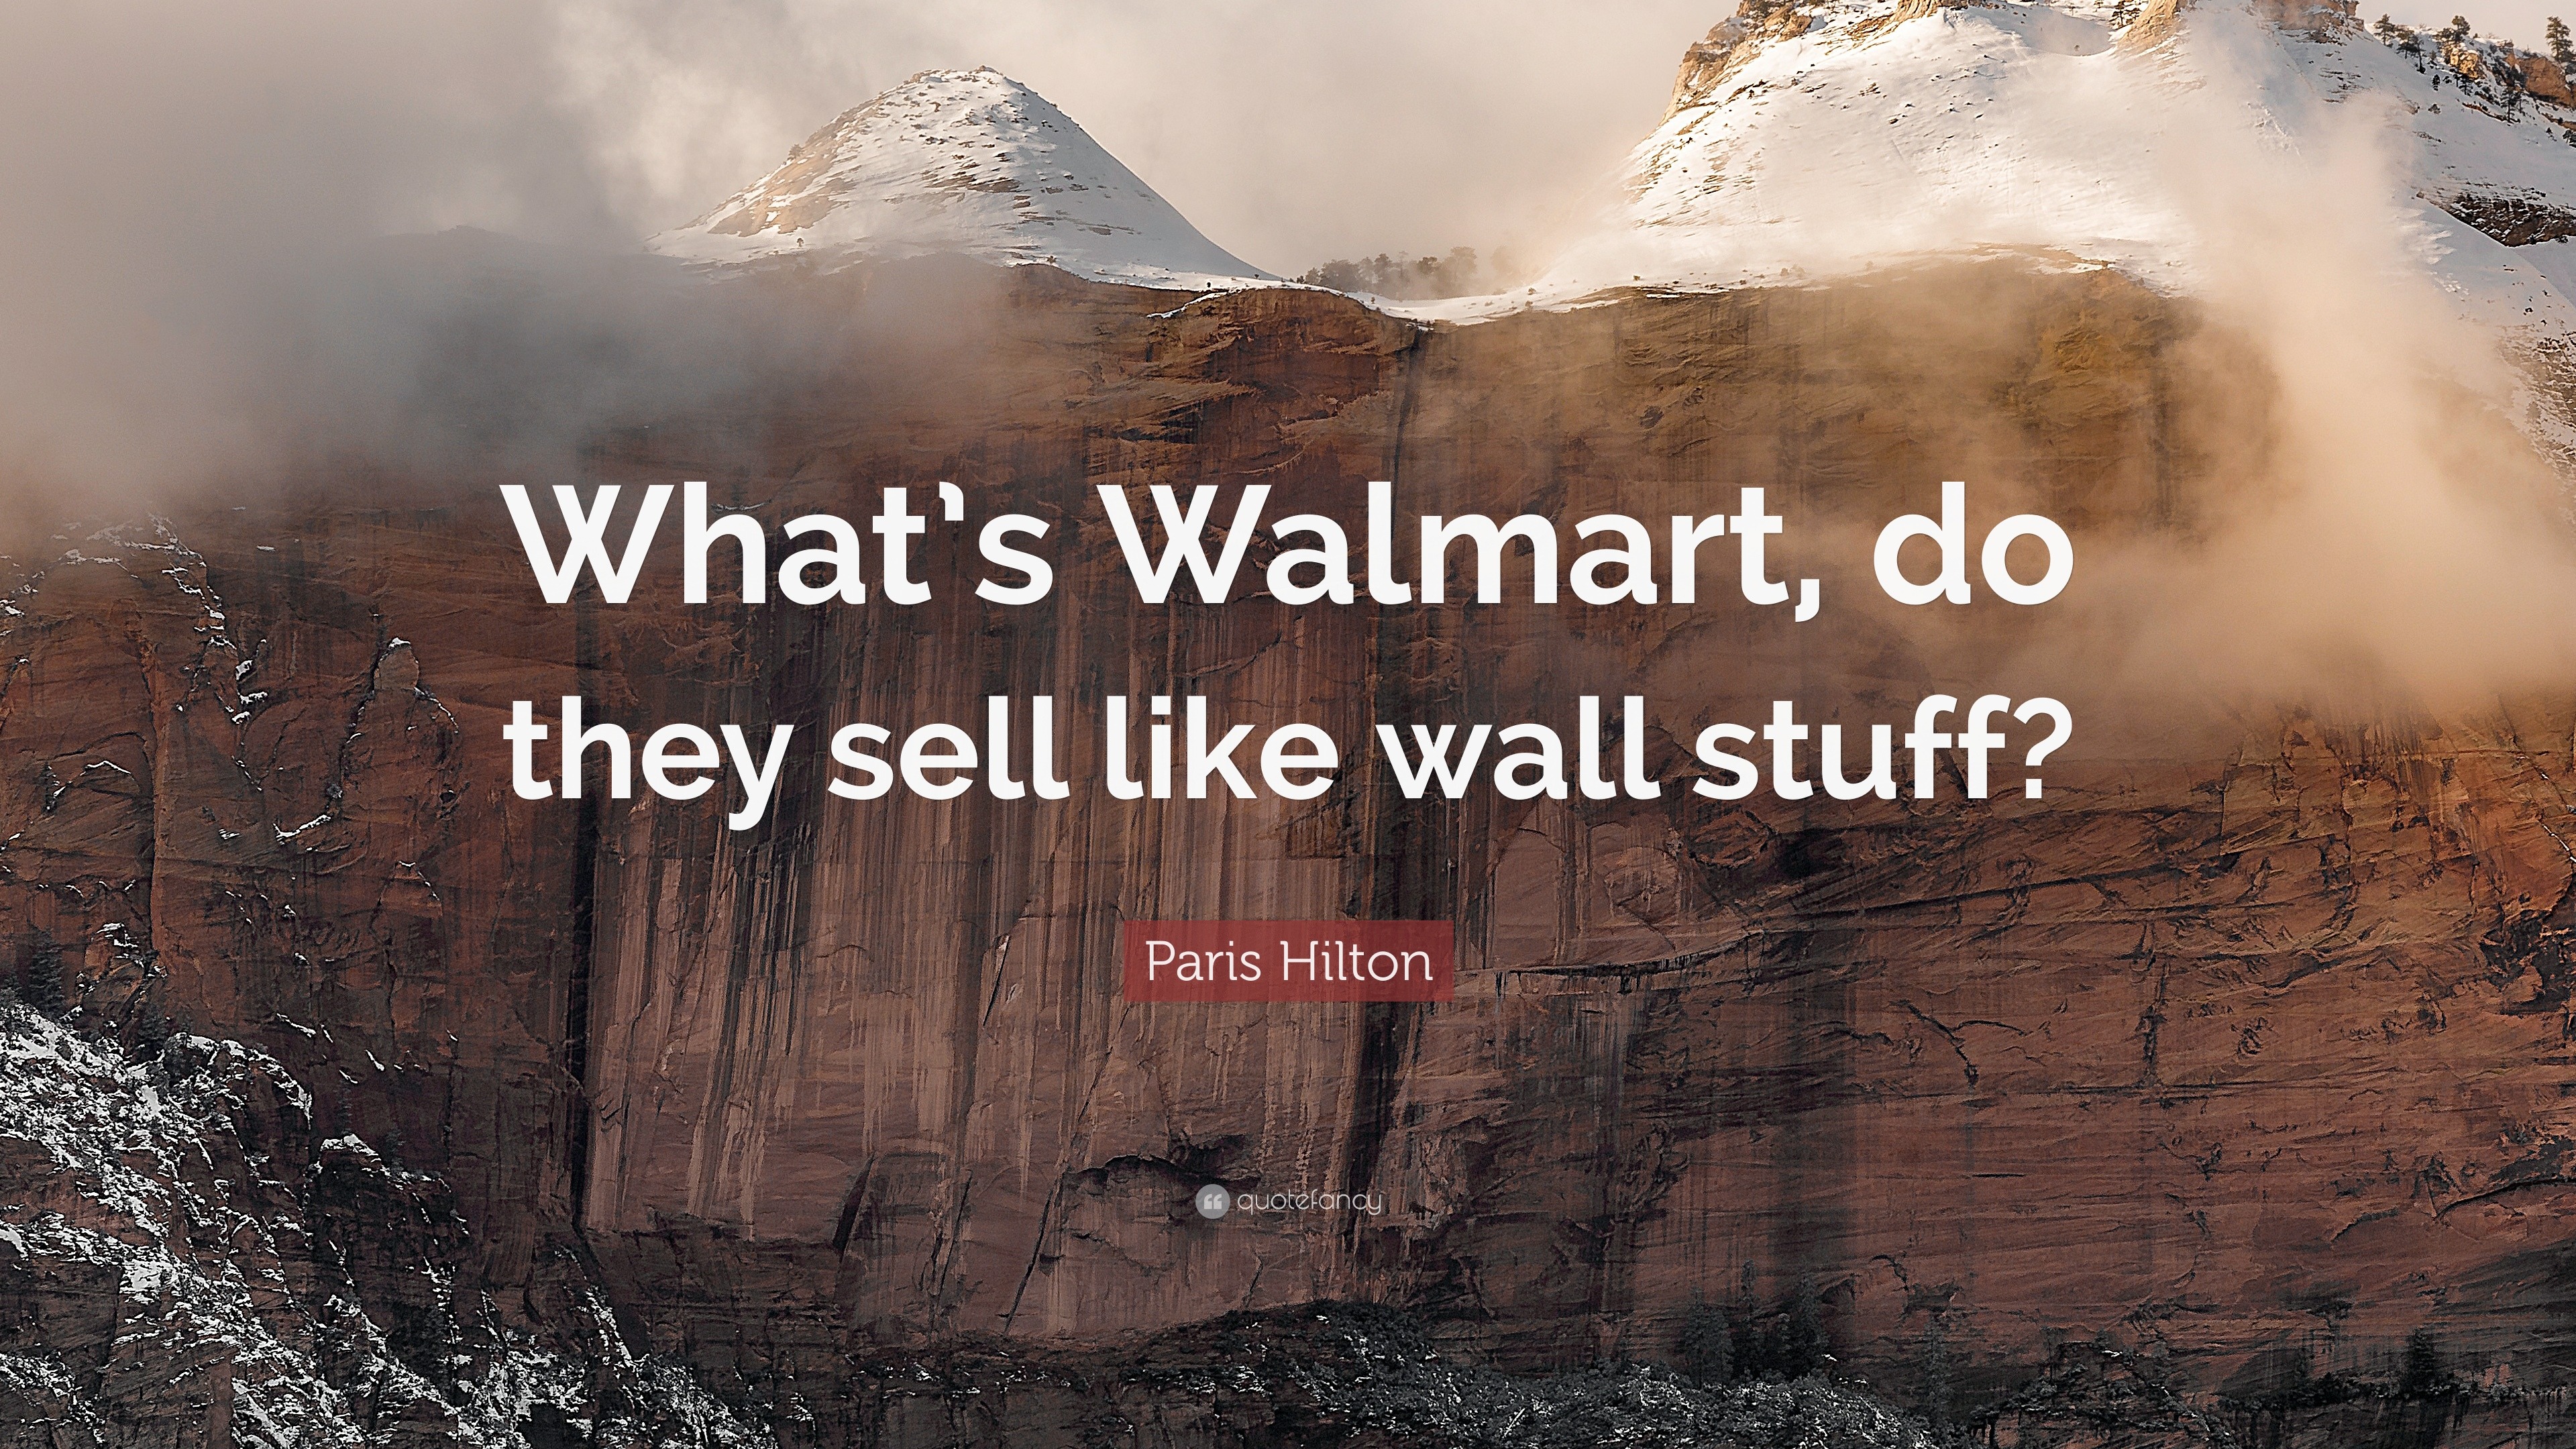 https://quotefancy.com/media/wallpaper/3840x2160/1986718-Paris-Hilton-Quote-What-s-Walmart-do-they-sell-like-wall-stuff.jpg